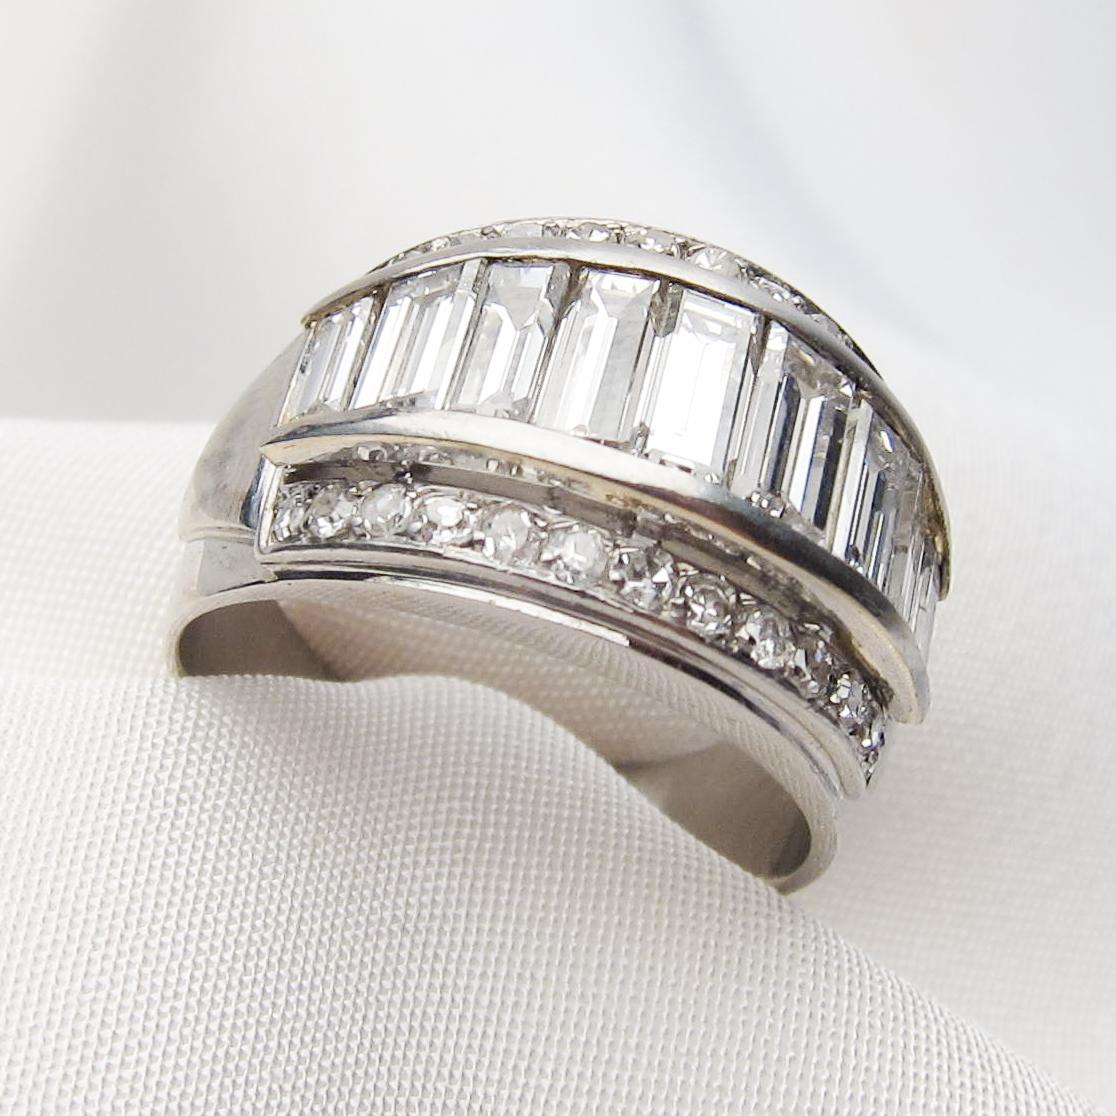 This amazingly decadent midcentury platinum band features nine beautiful baguette diamonds channel-set across the top of the ring, tapering in size with the largest in the center. Bead-set across each outside edge of the band are 13 single-cut